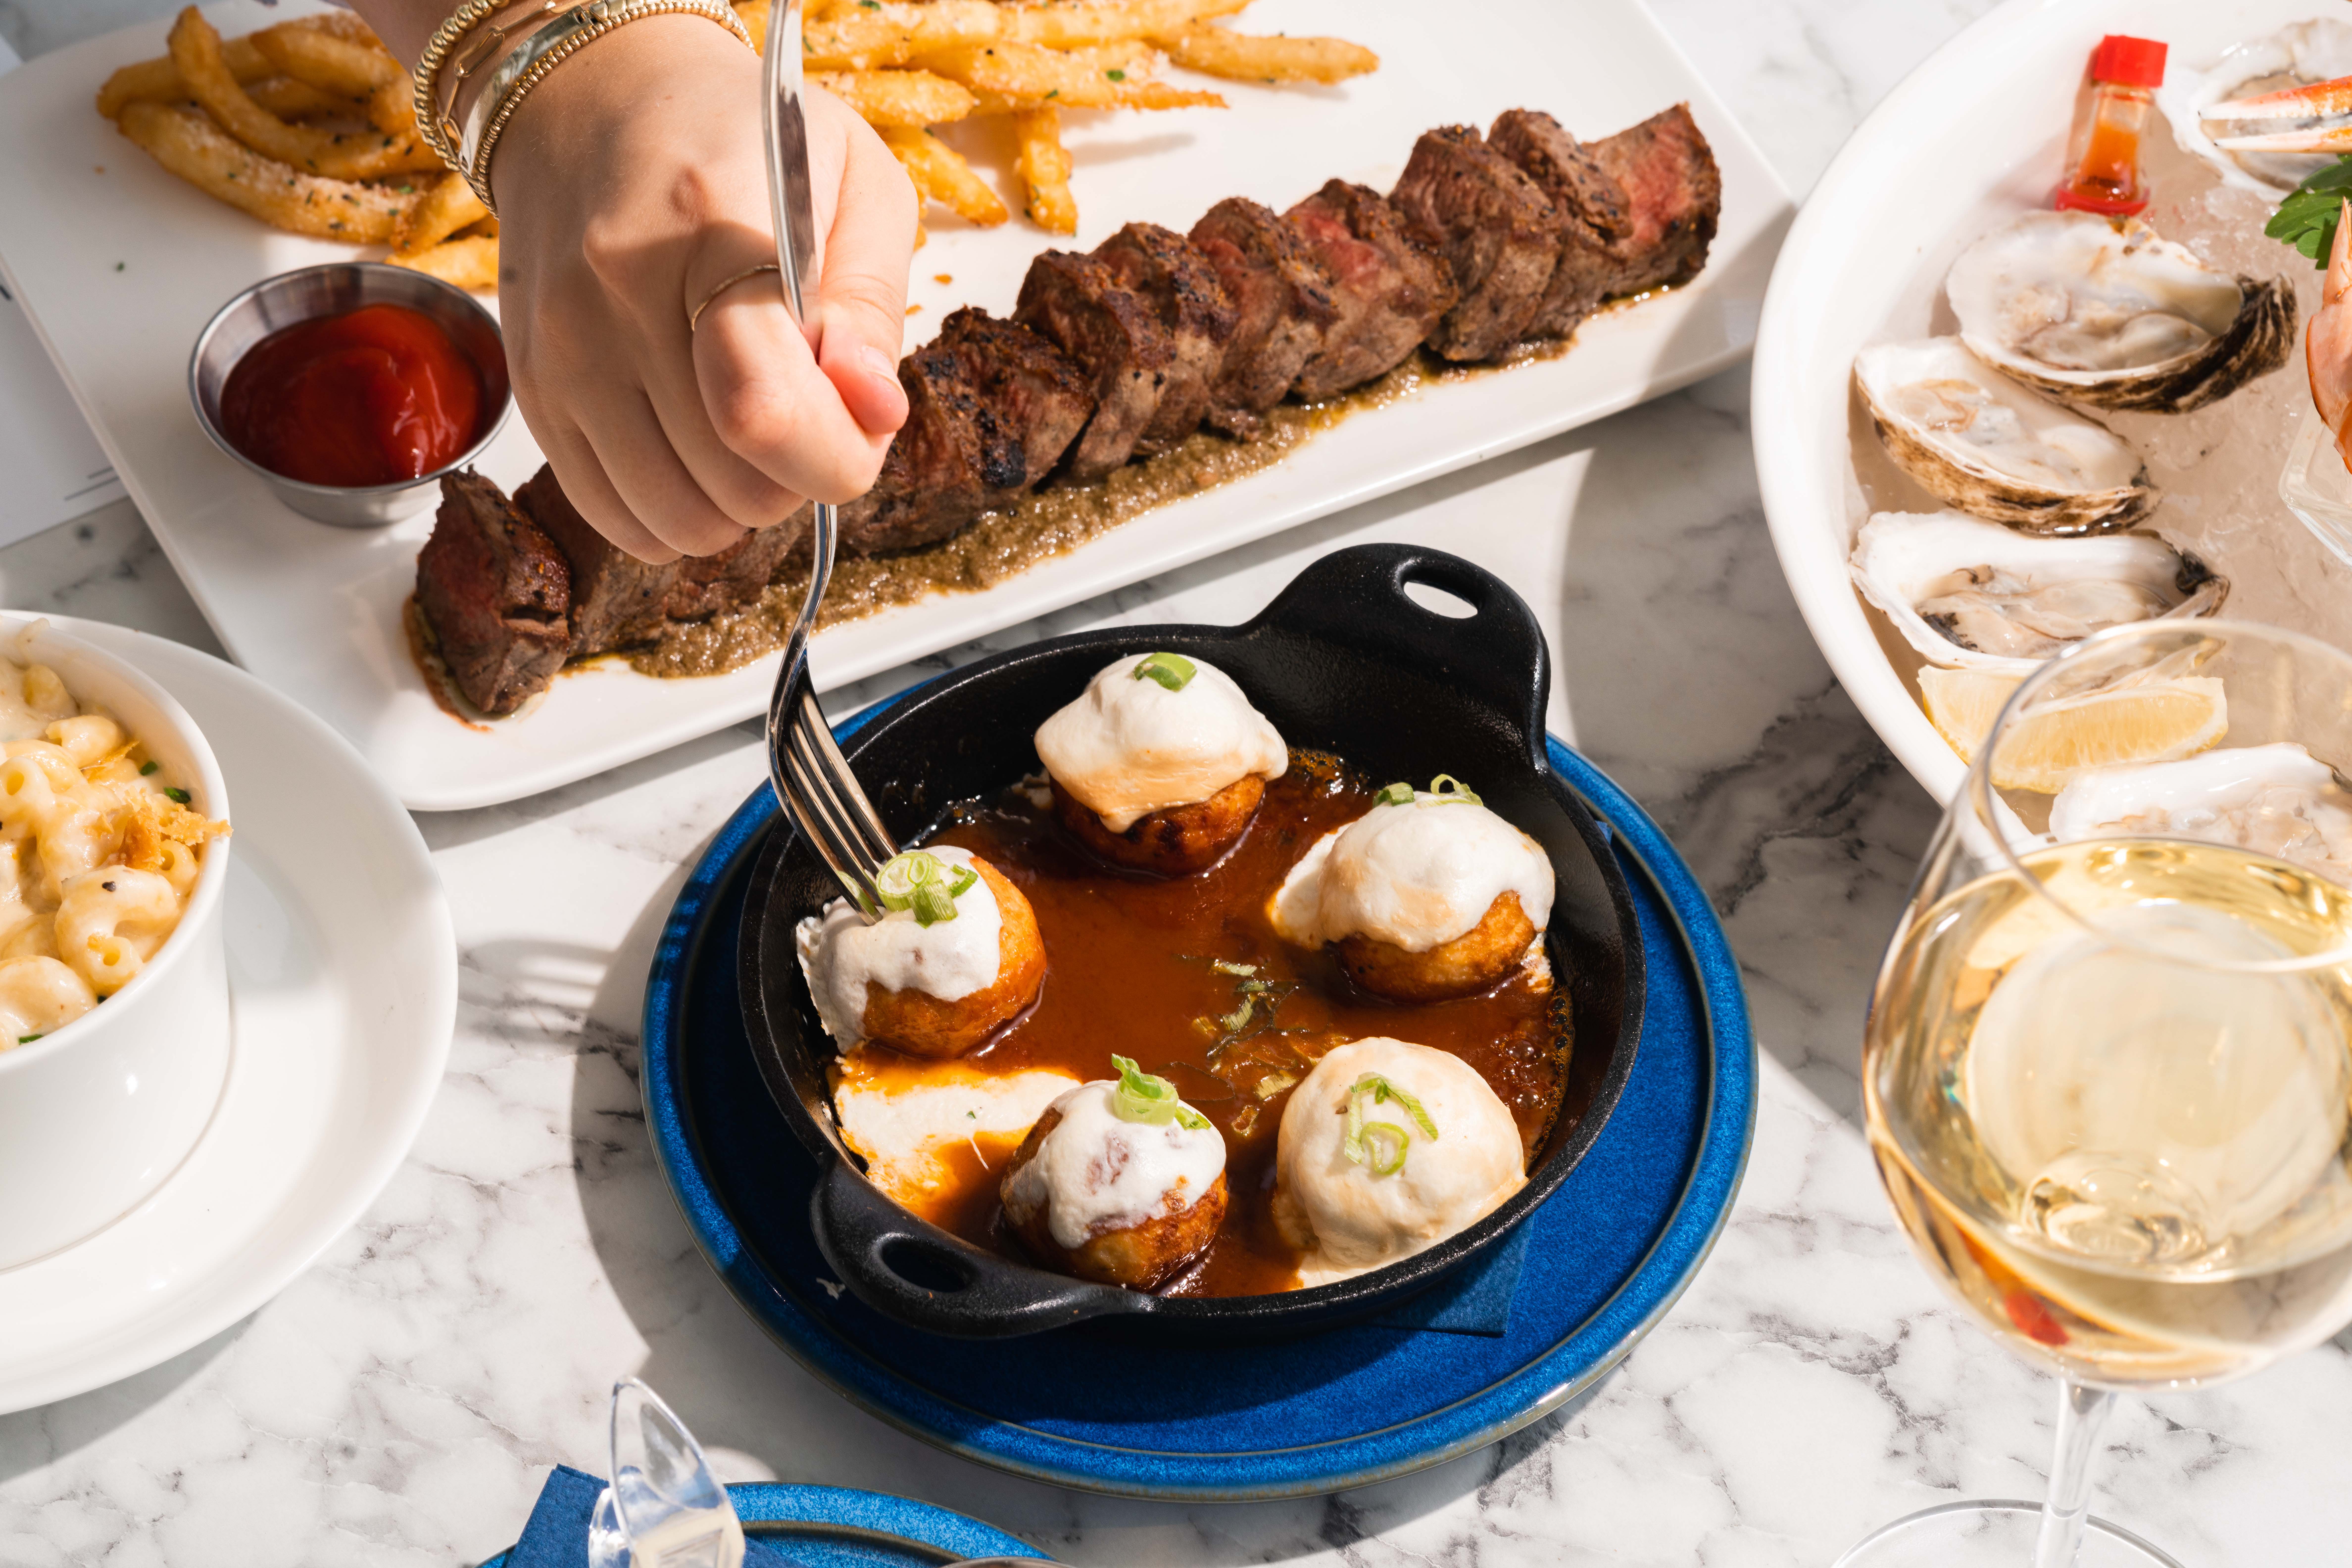 A marbled table with various plates and dishes filled with various food items including oysters, steak and fries, and someone grabbing a meatball from a plate using a fork. 